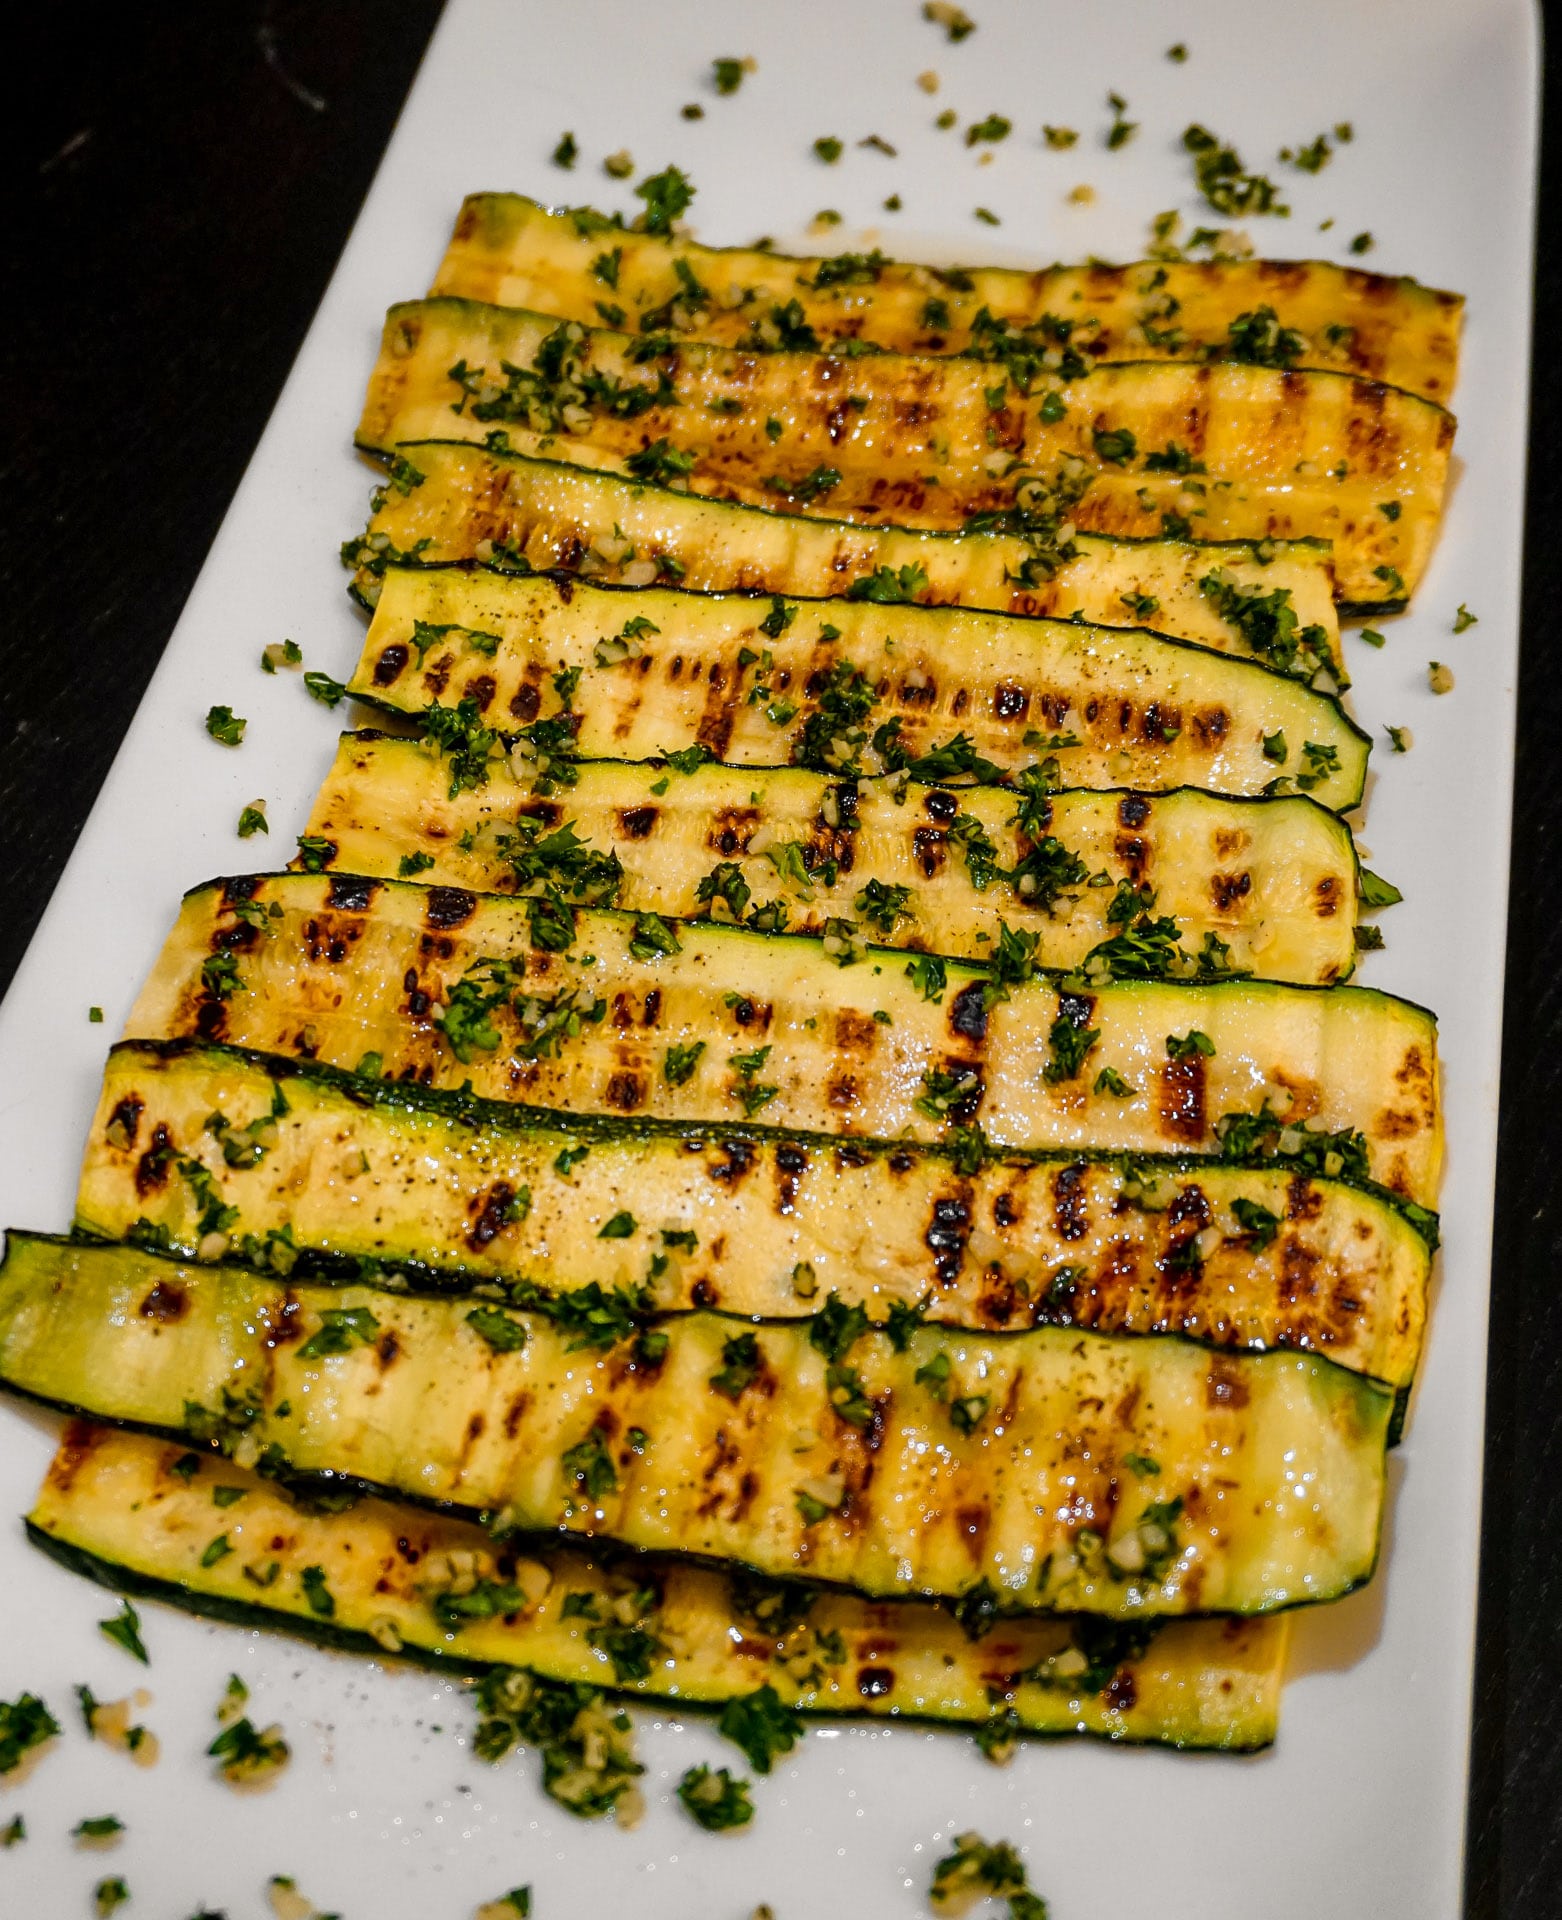 Italian Style Grilled Zucchini - Recipe from Tuscany